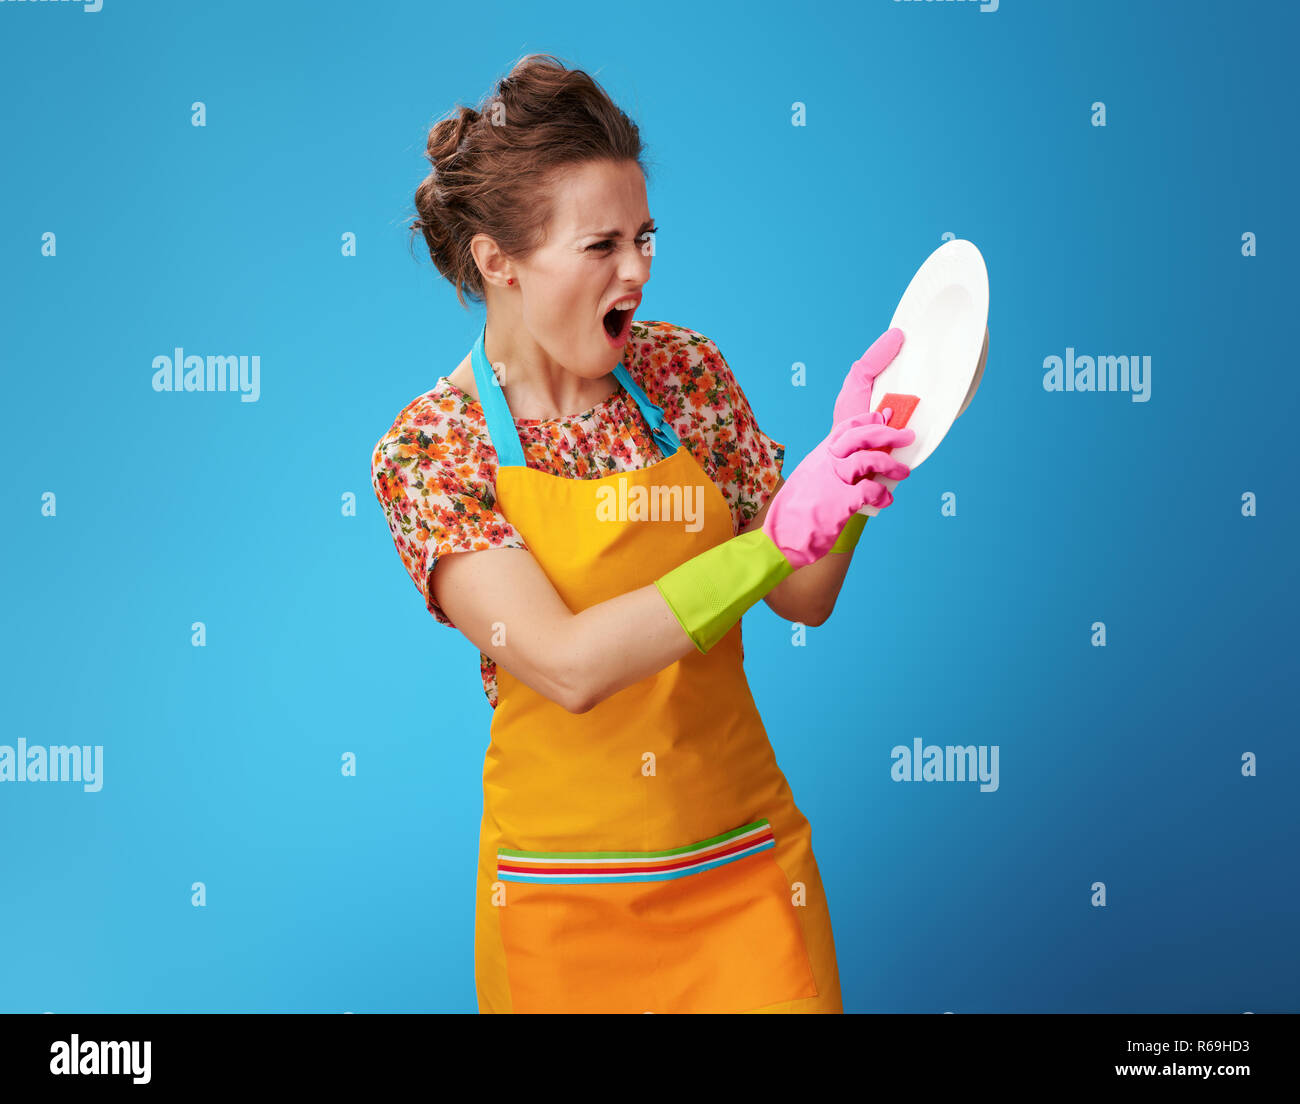 angry young woman in orange apron with sponge washing dish isolated on blue background. What will help to wash super dirty dishes? Tips, detergents or Stock Photo